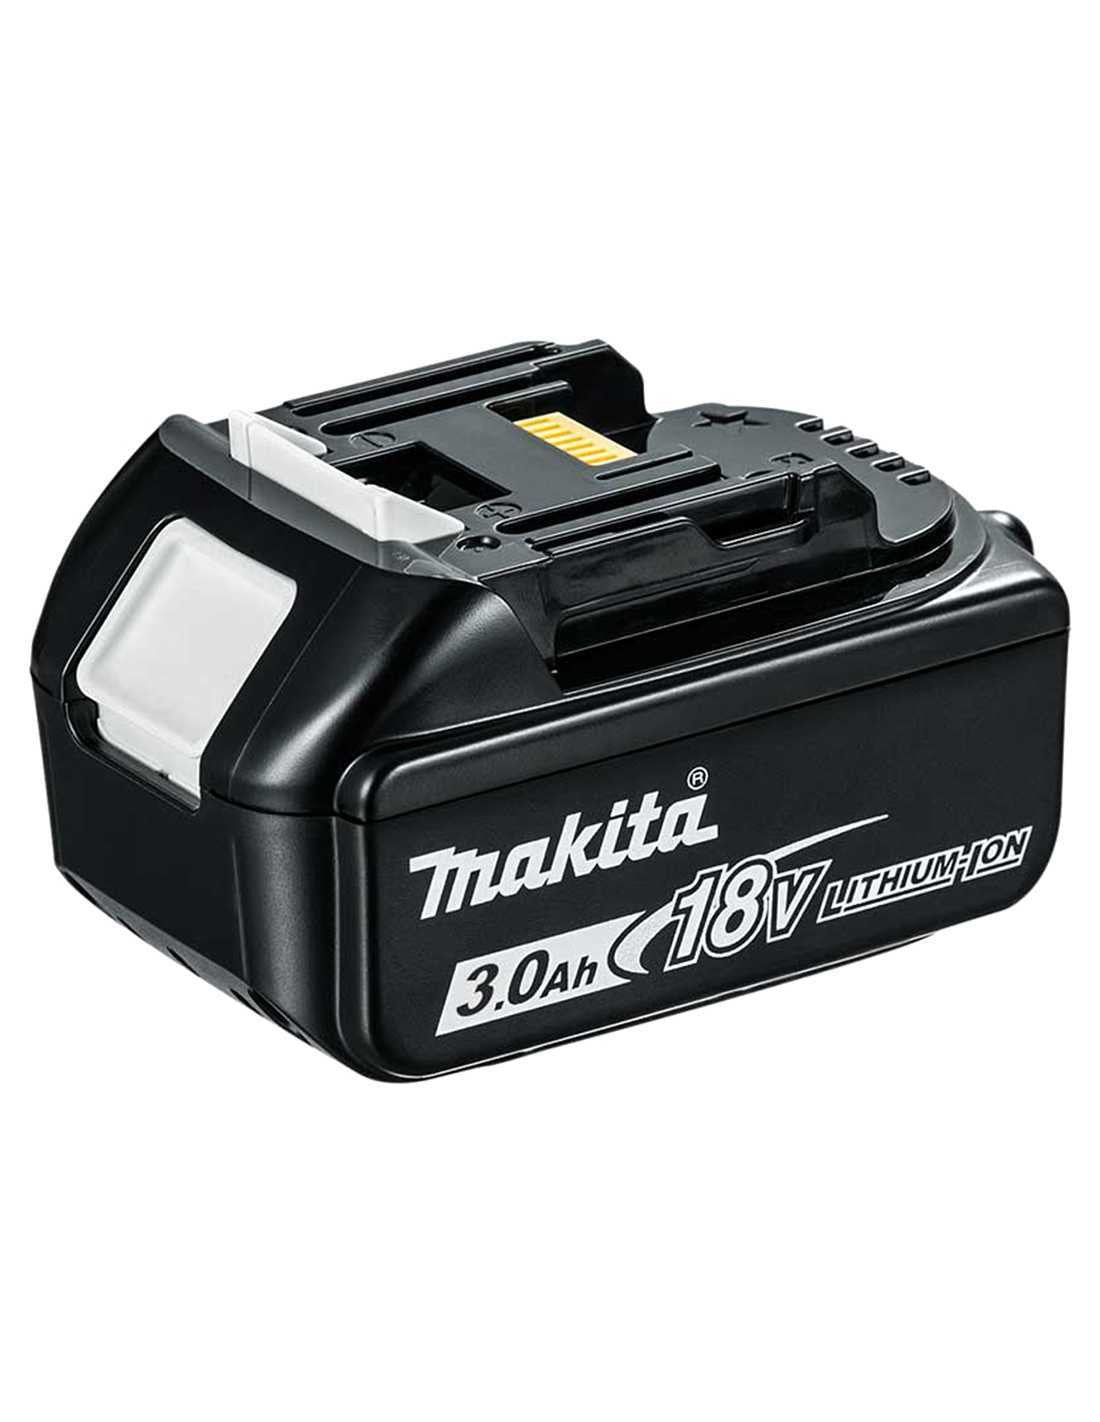 Makita kit with 10 tools + 3 3ah batteries + charger + 2 bags DLX1080BL3